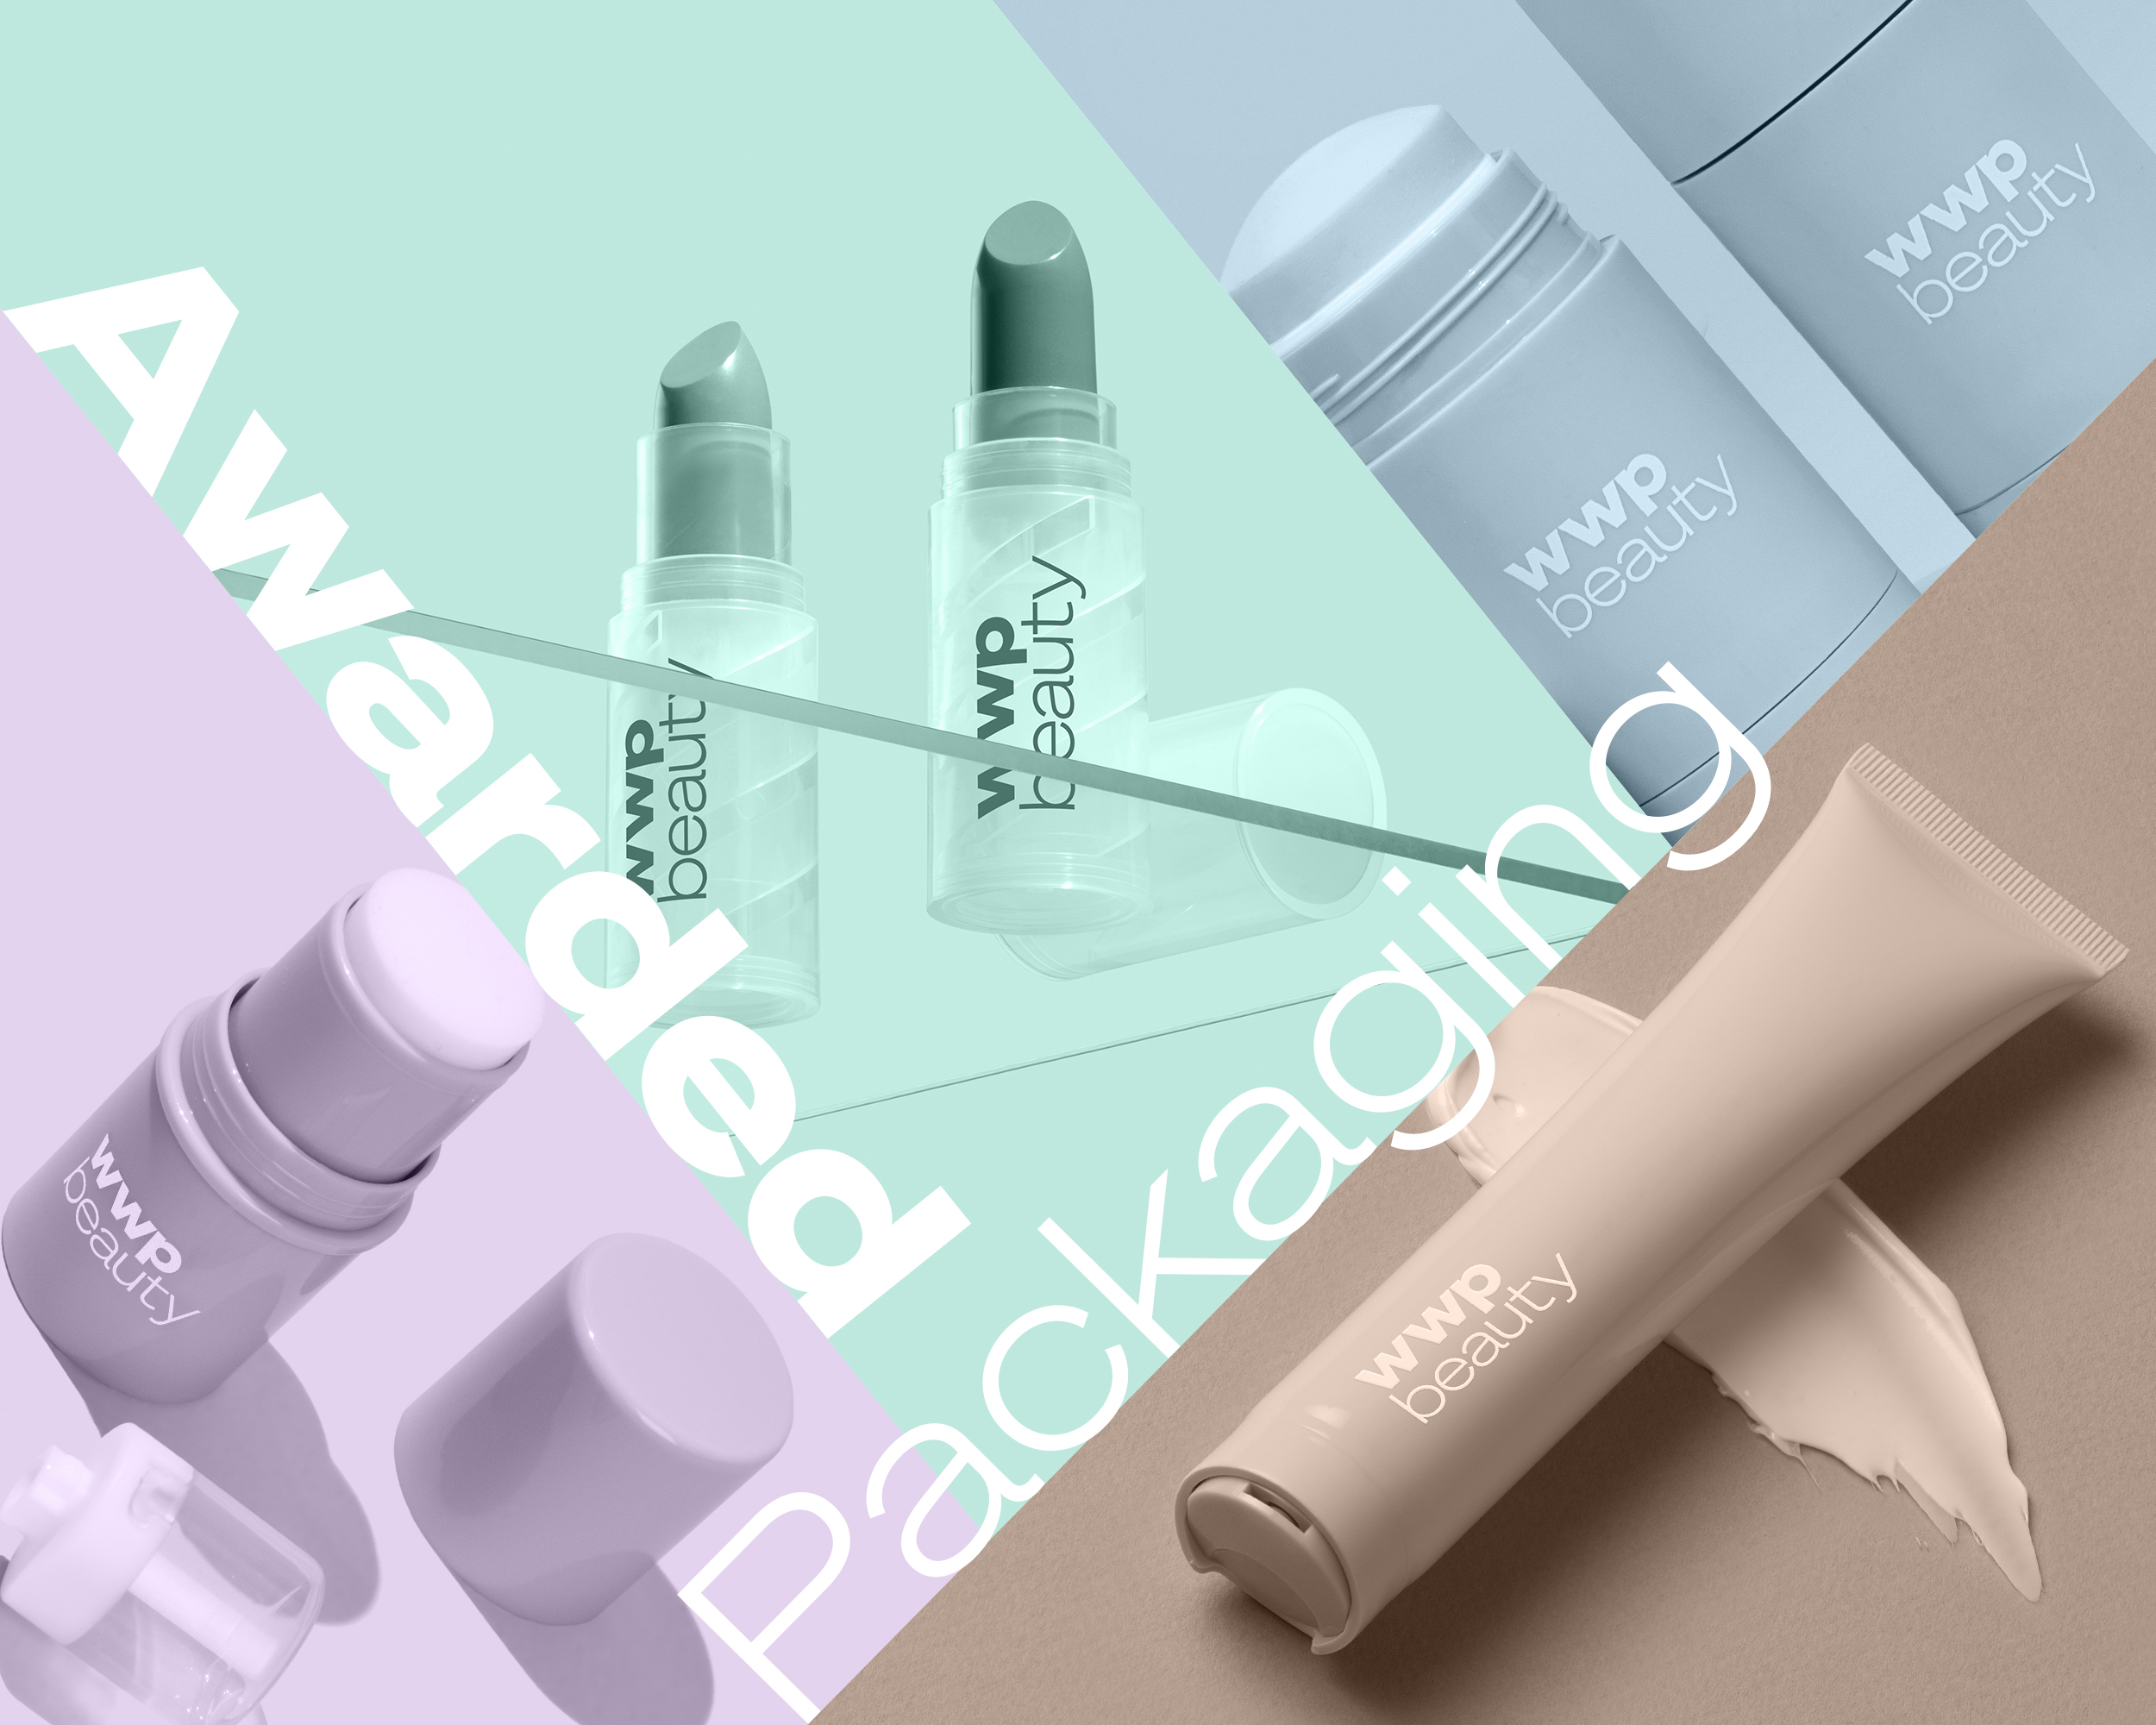 WWP Beauty unveils new sustainable packaging and turnkey solutions at Luxe  Pack LA